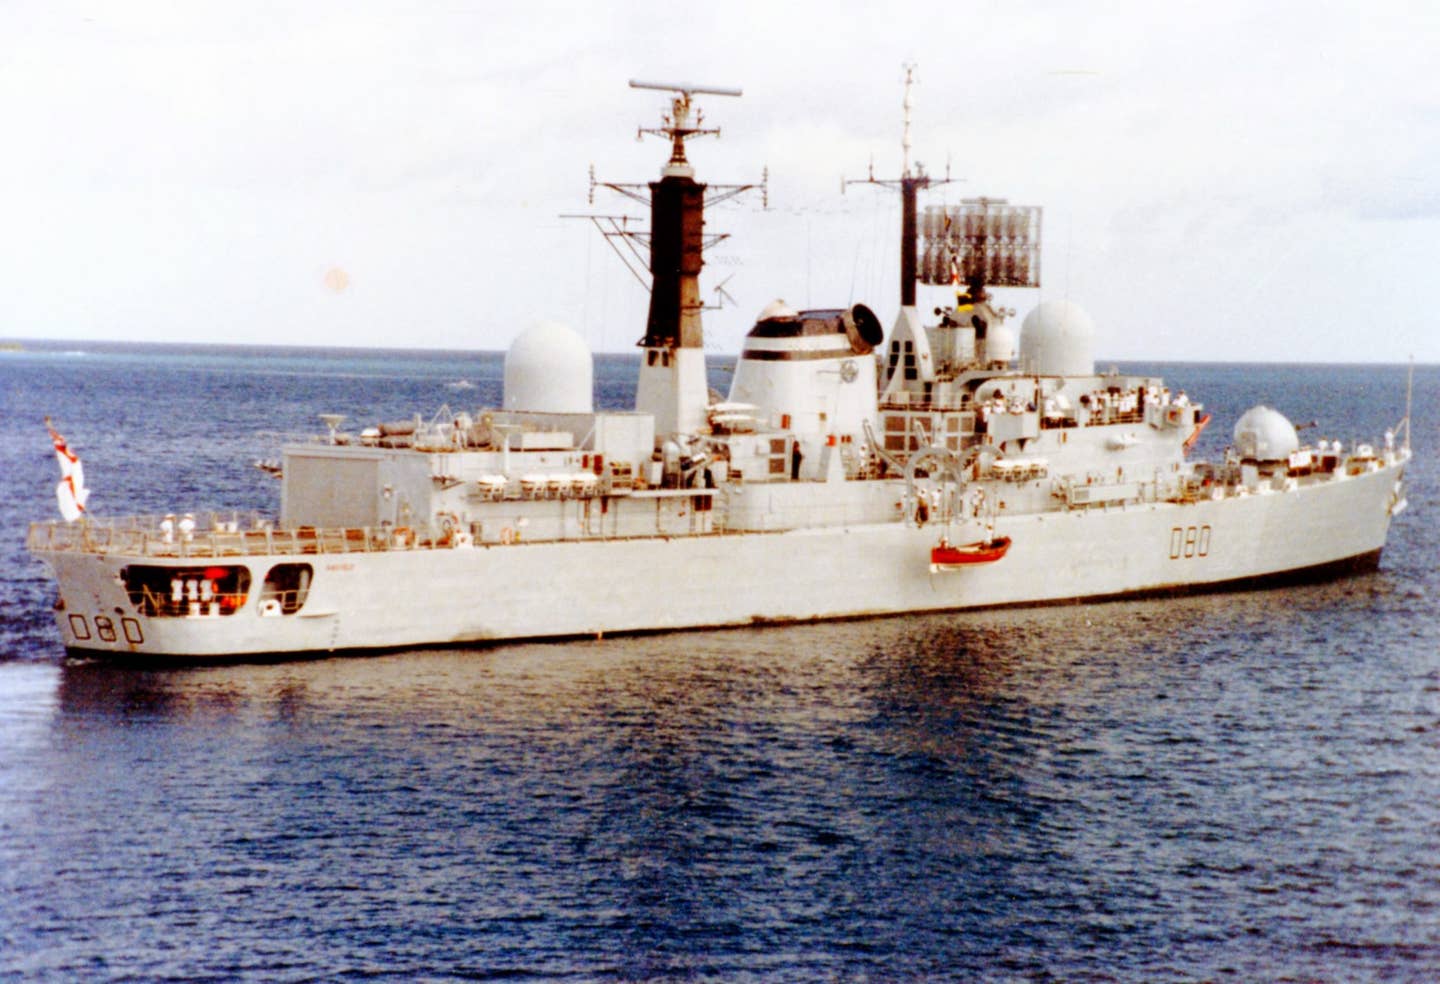 The Type 42 guided-missile destroyer HMS Sheffield, sunk by an Exocet fired by an Argentinean Super Etendard. (Wikimedia Commons photo by Nathalmad)